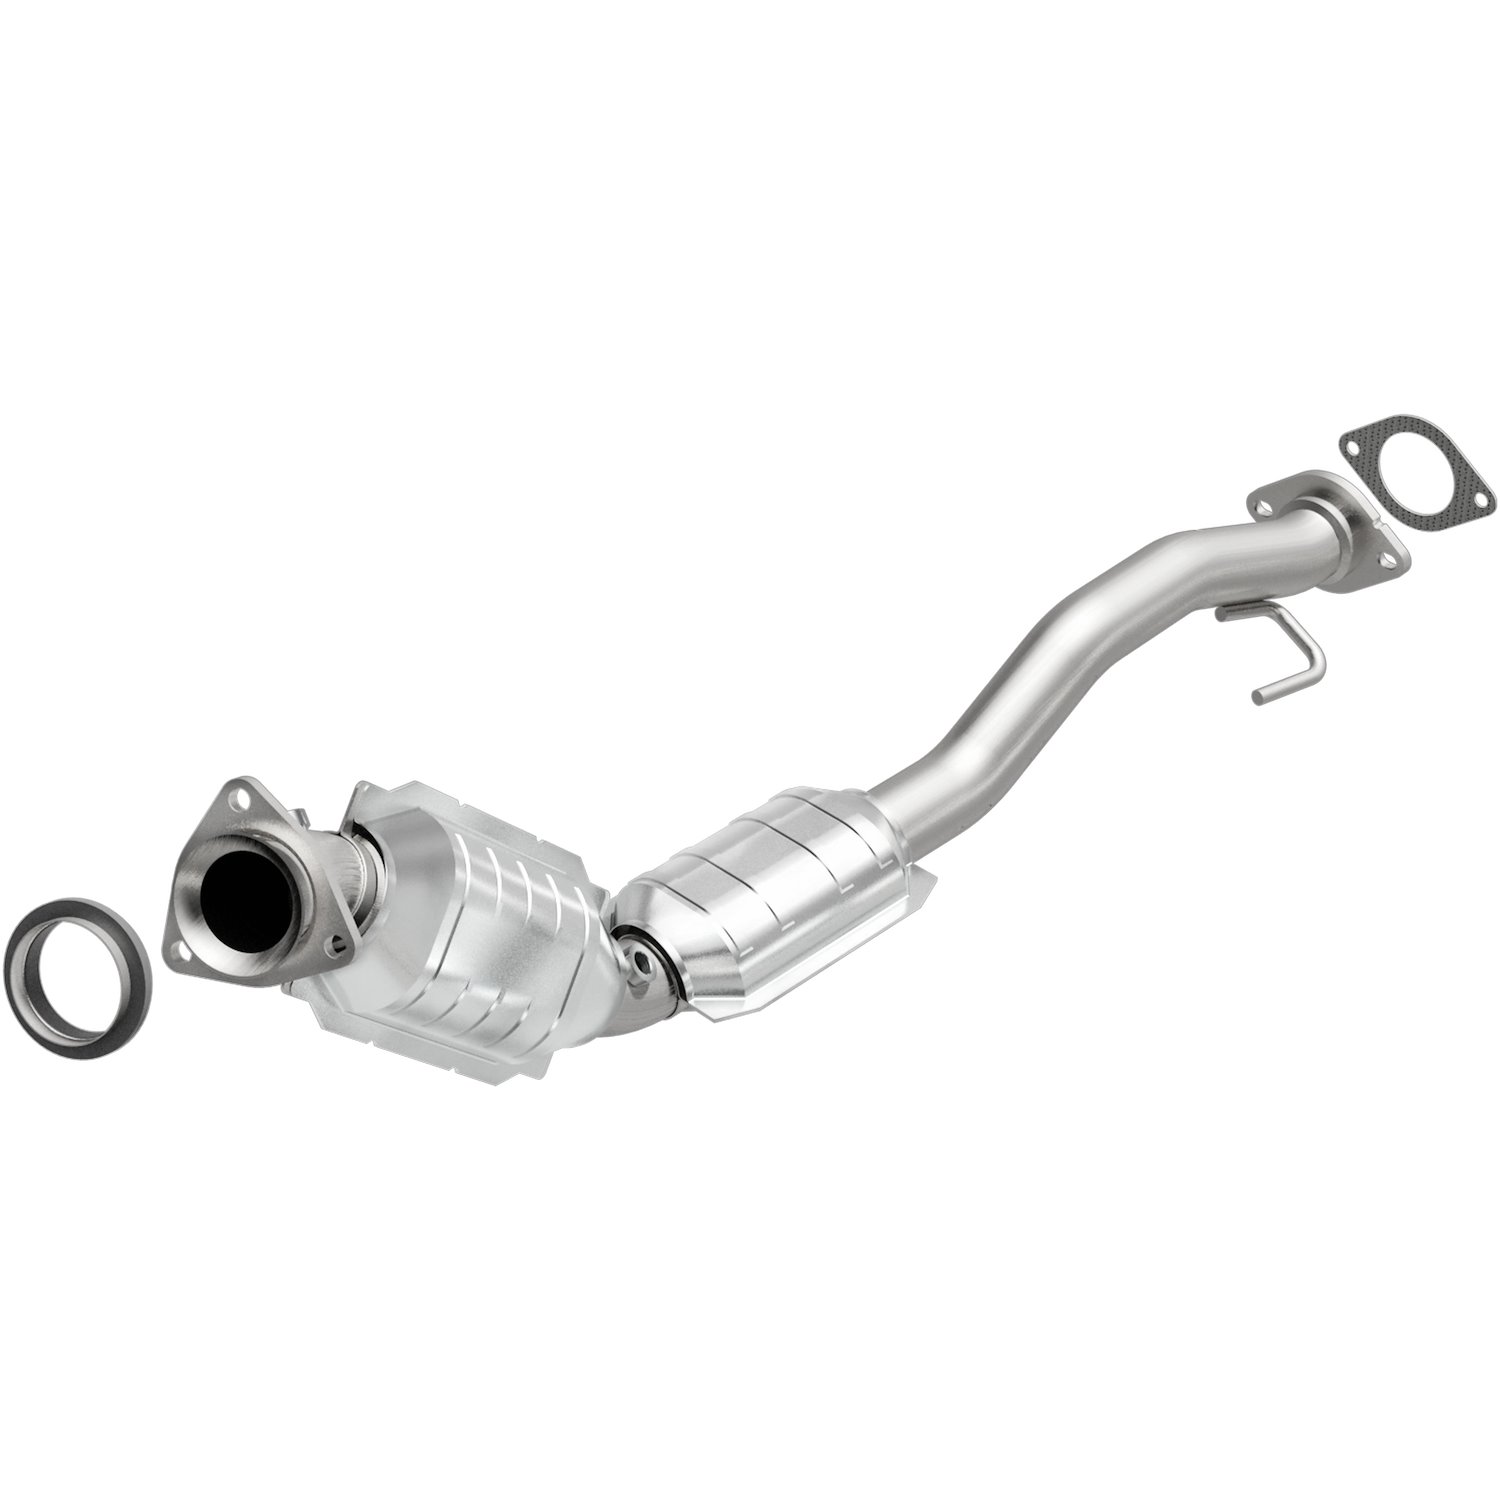 OEM Grade Federal / EPA Compliant Direct-Fit Catalytic